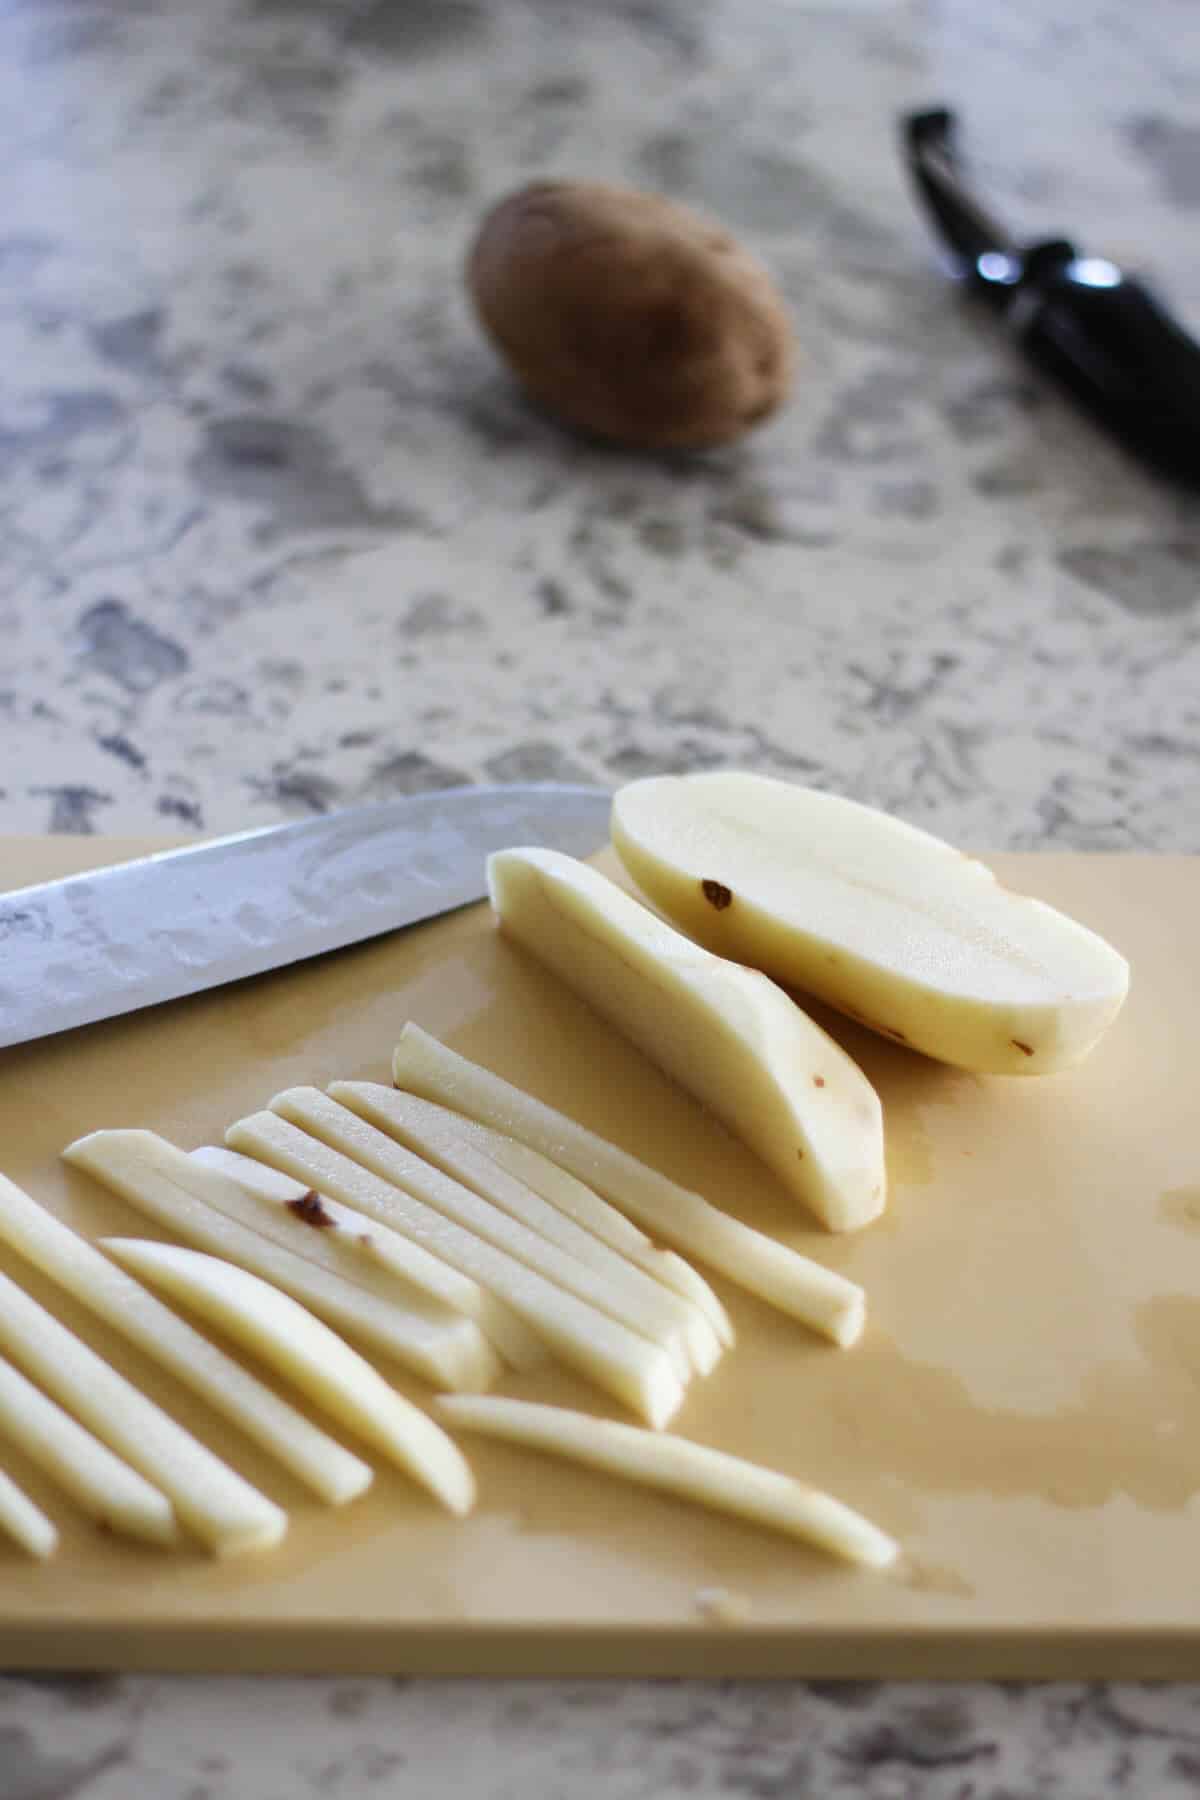 A cutting board with potatoes cut into fries with a whole potato and a vegetable peeler in the background.